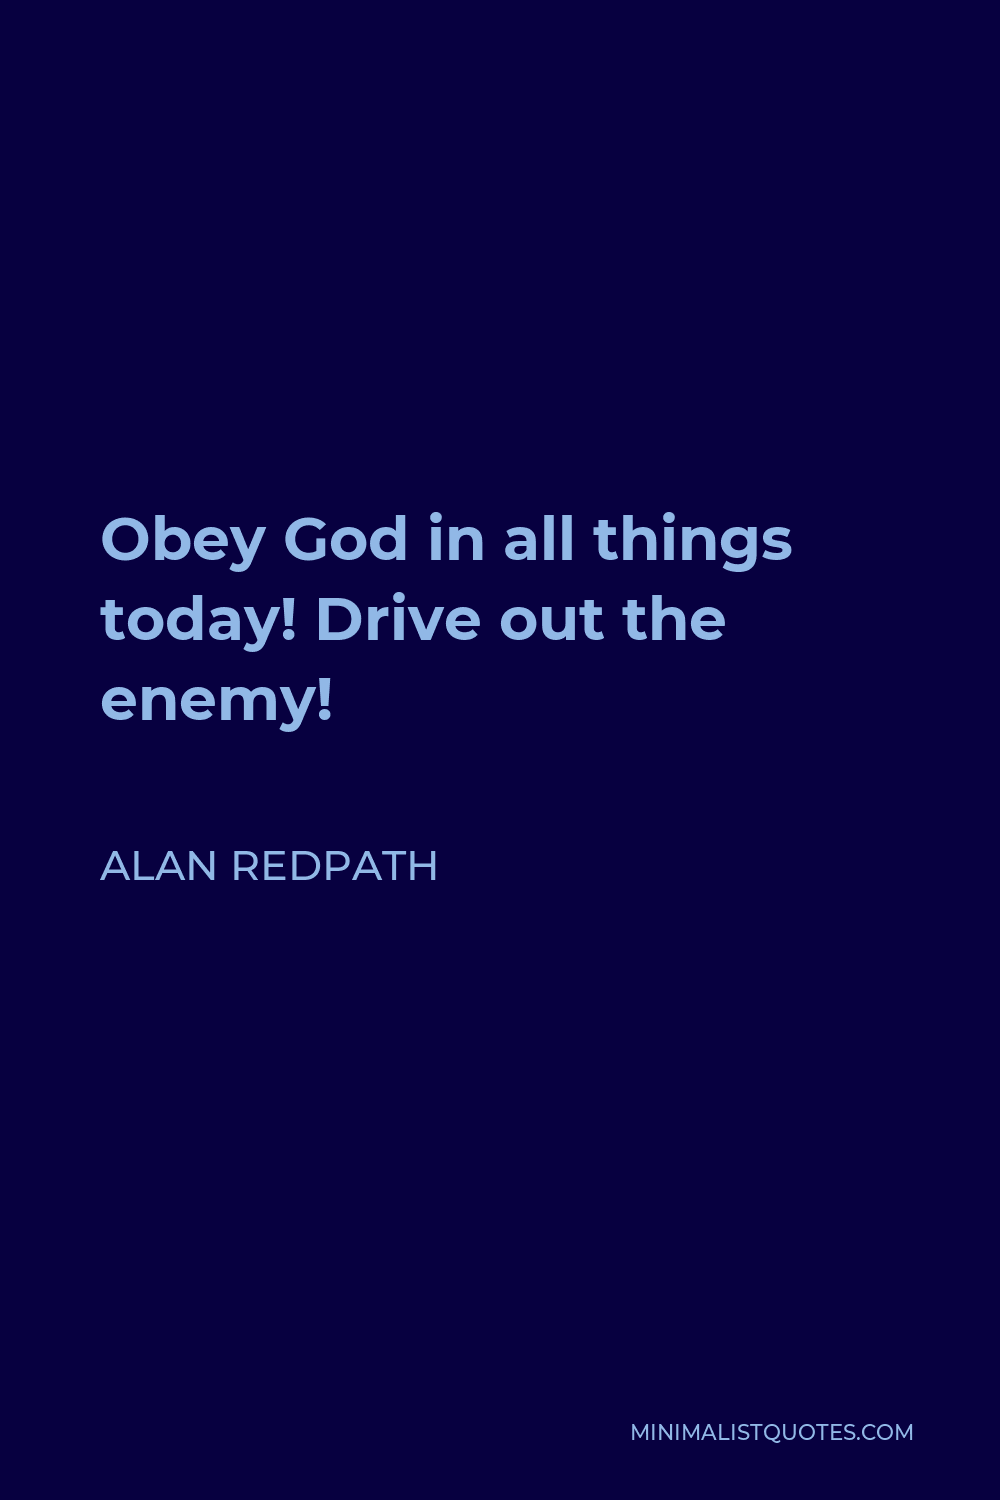 Alan Redpath Quote - Obey God in all things today! Drive out the enemy!